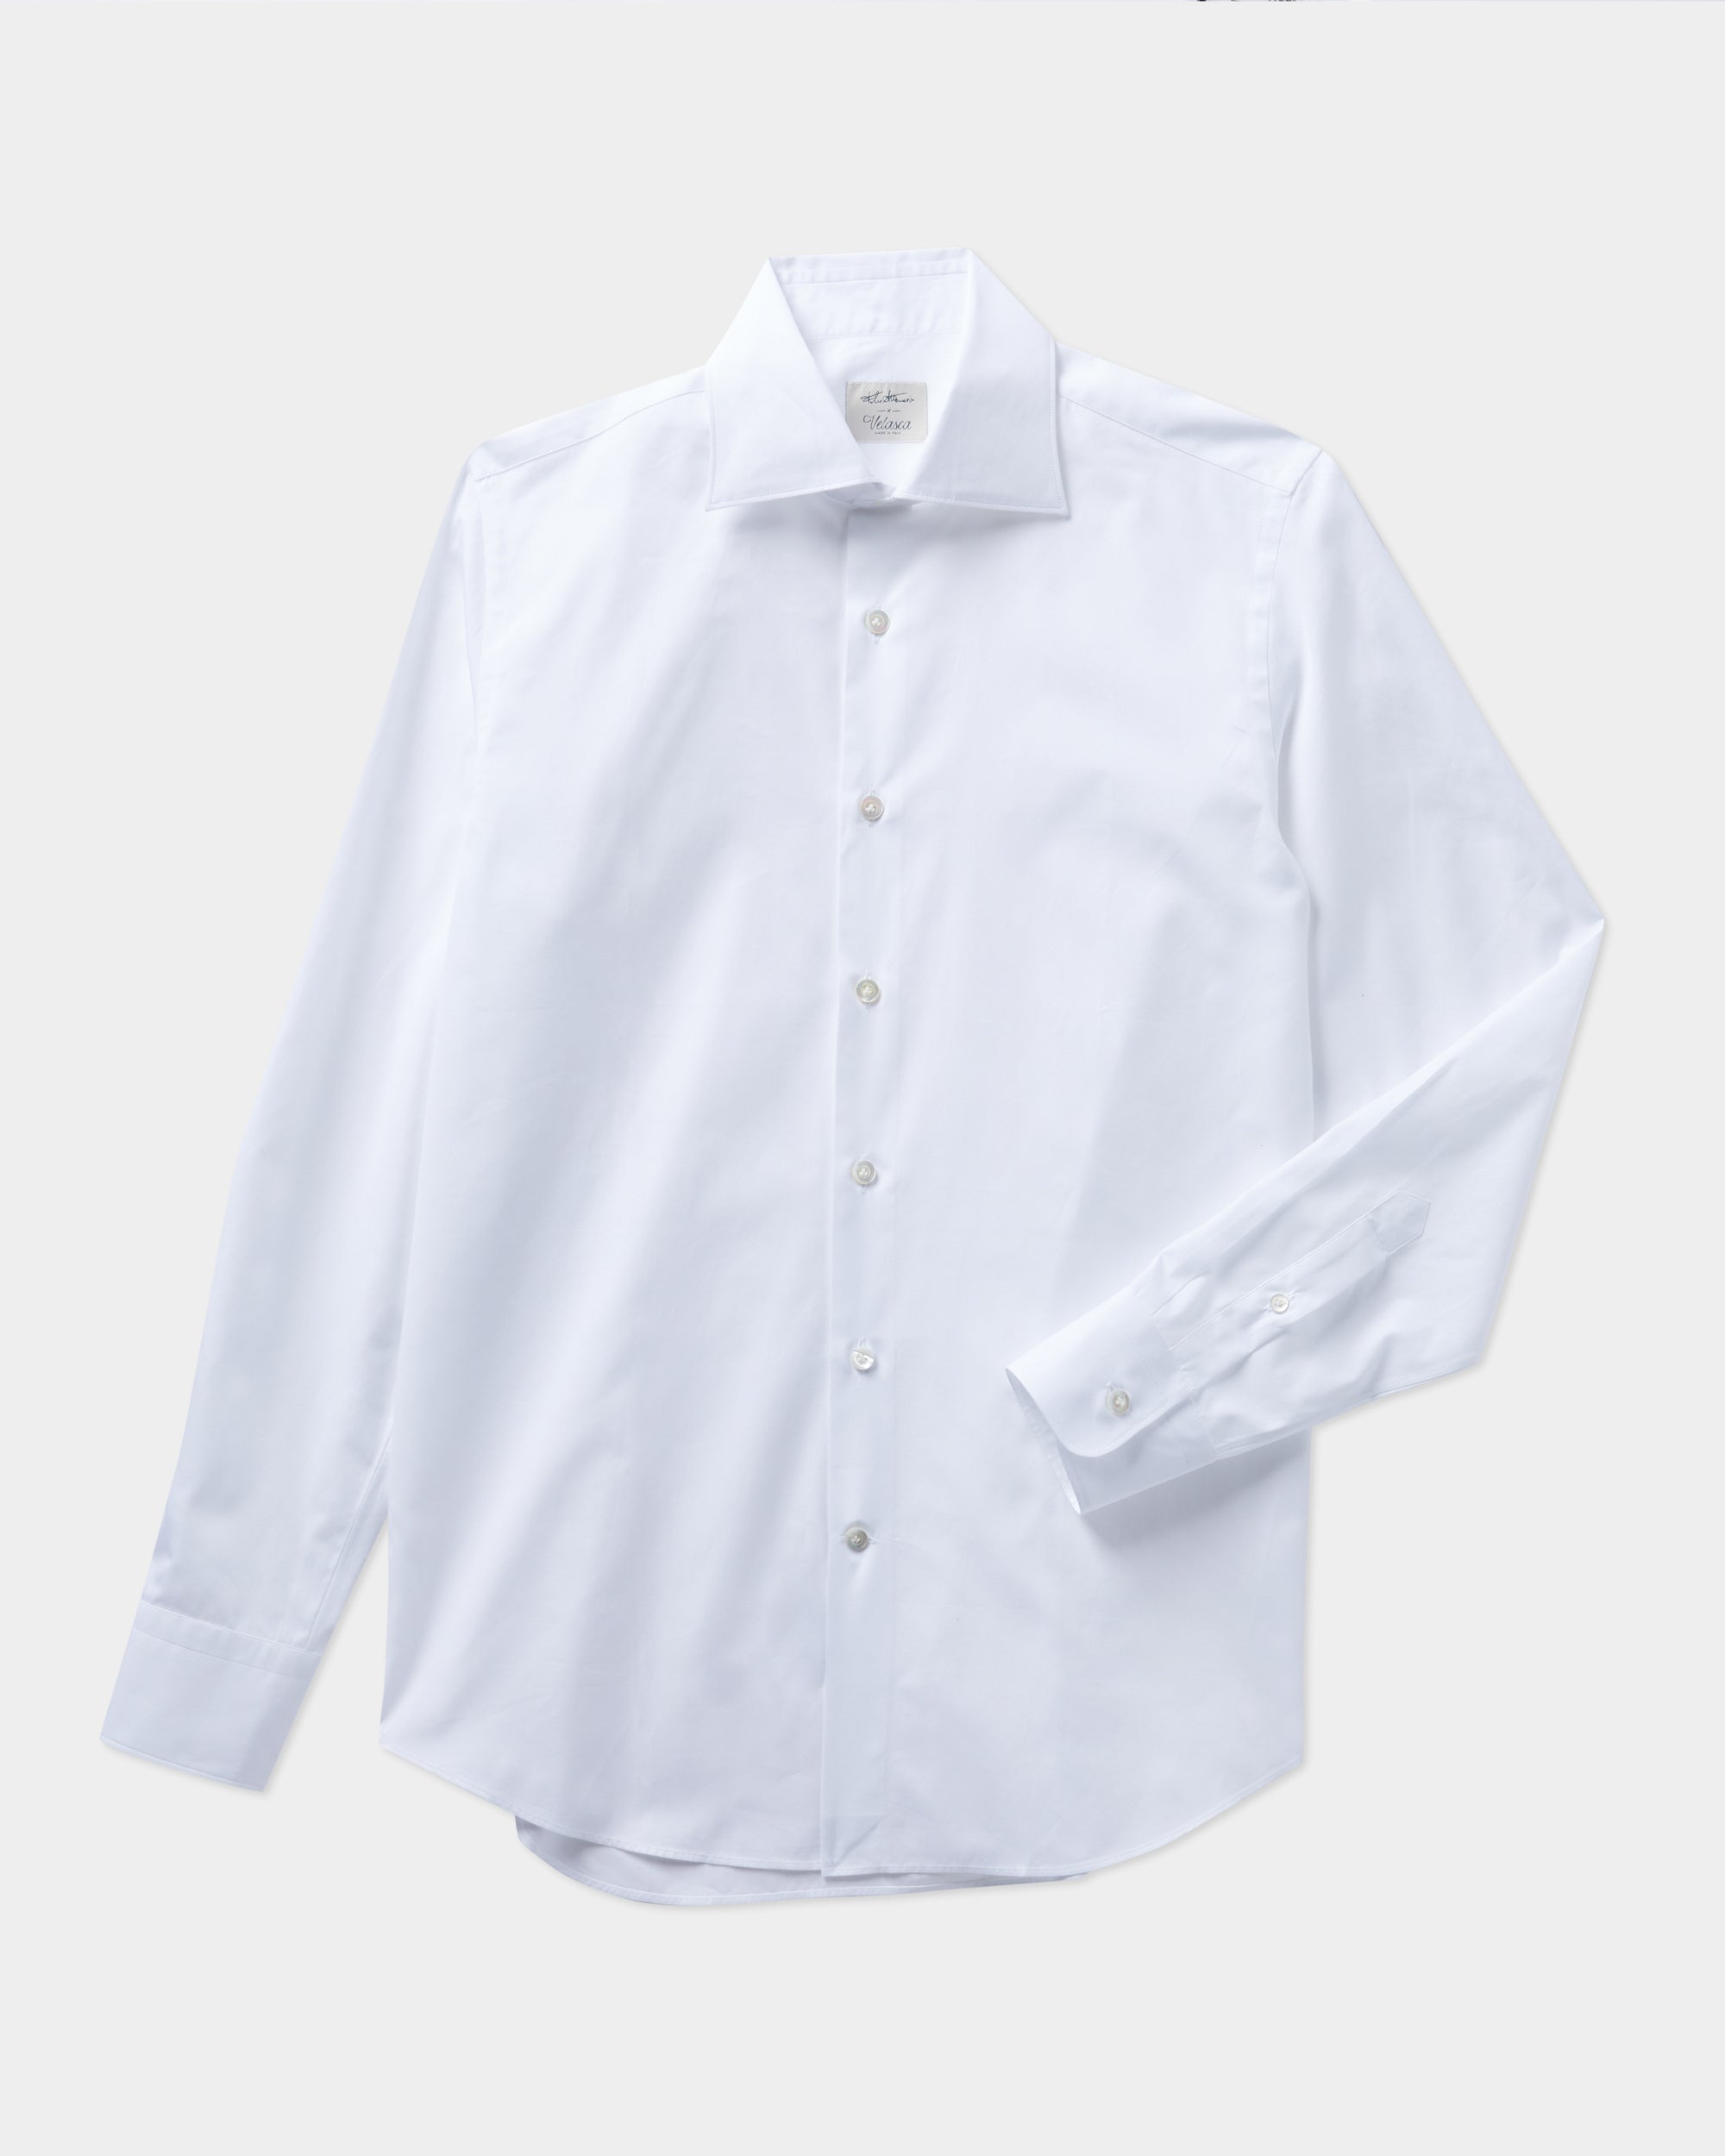 Velasca | Men\'s white cotton button-down shirt, made in Italy